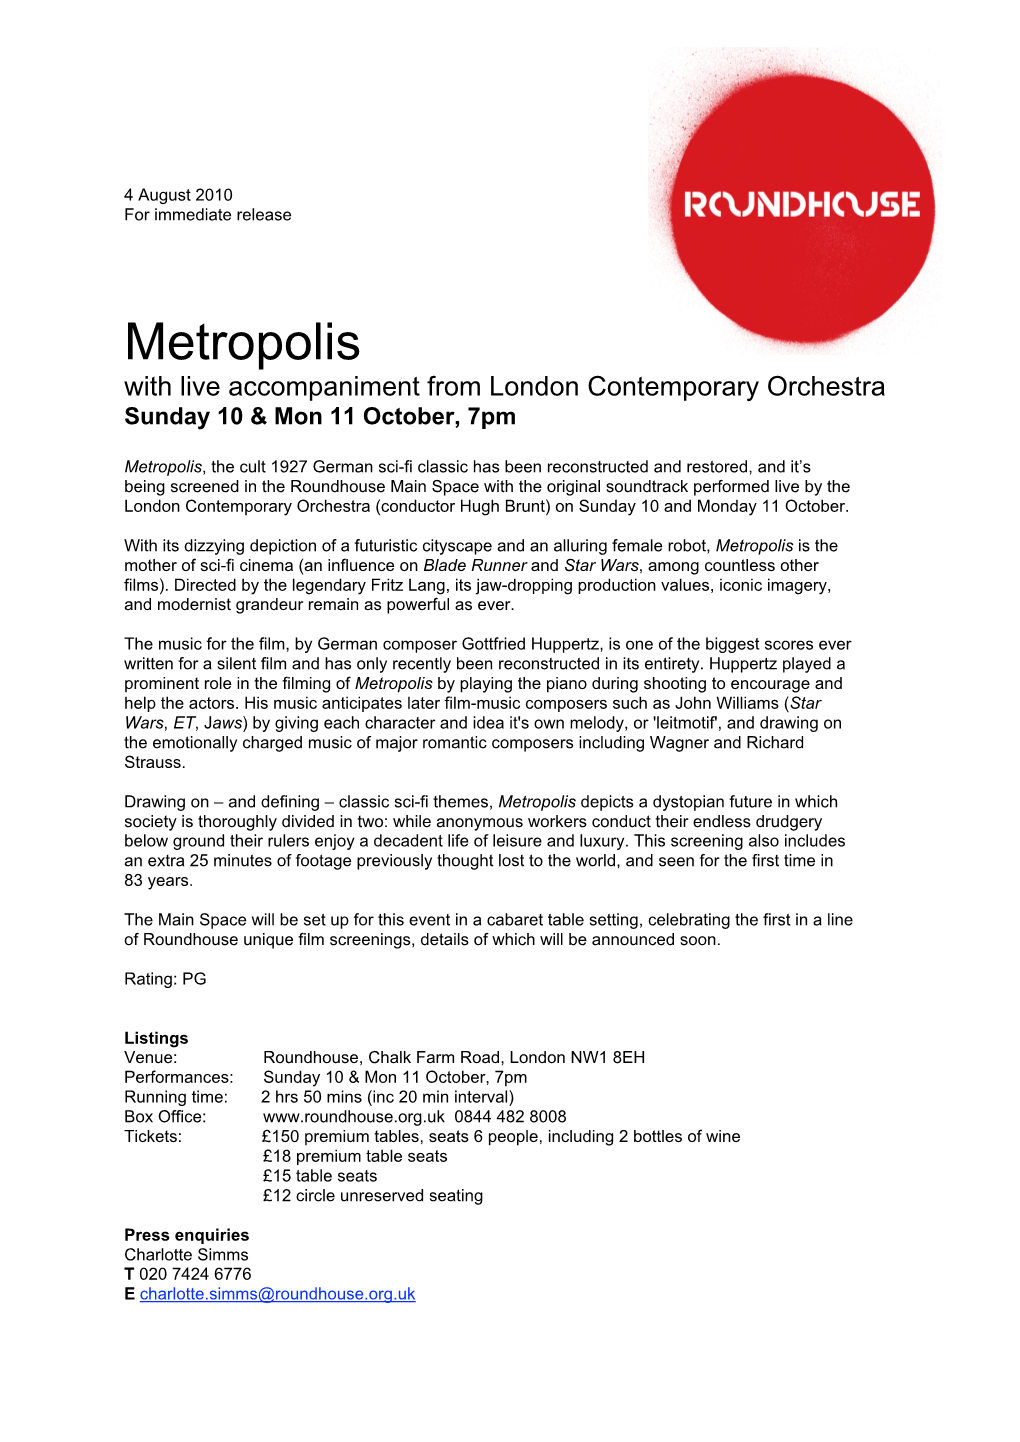 Metropolis with Live Accompaniment from London Contemporary Orchestra Sunday 10 & Mon 11 October, 7Pm